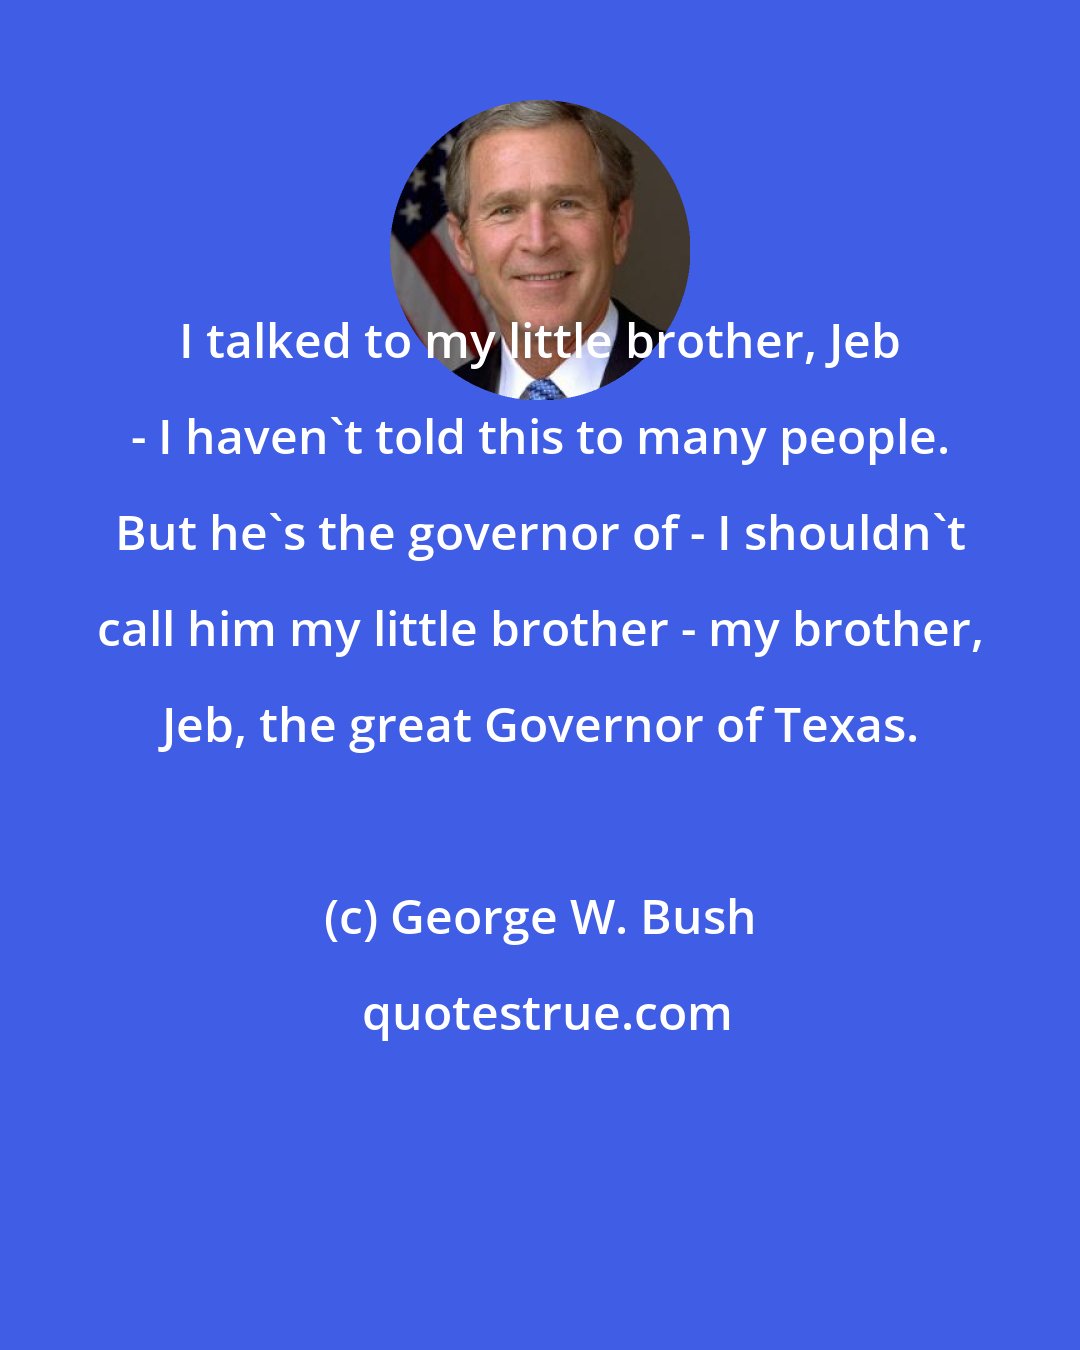 George W. Bush: I talked to my little brother, Jeb - I haven't told this to many people. But he's the governor of - I shouldn't call him my little brother - my brother, Jeb, the great Governor of Texas.